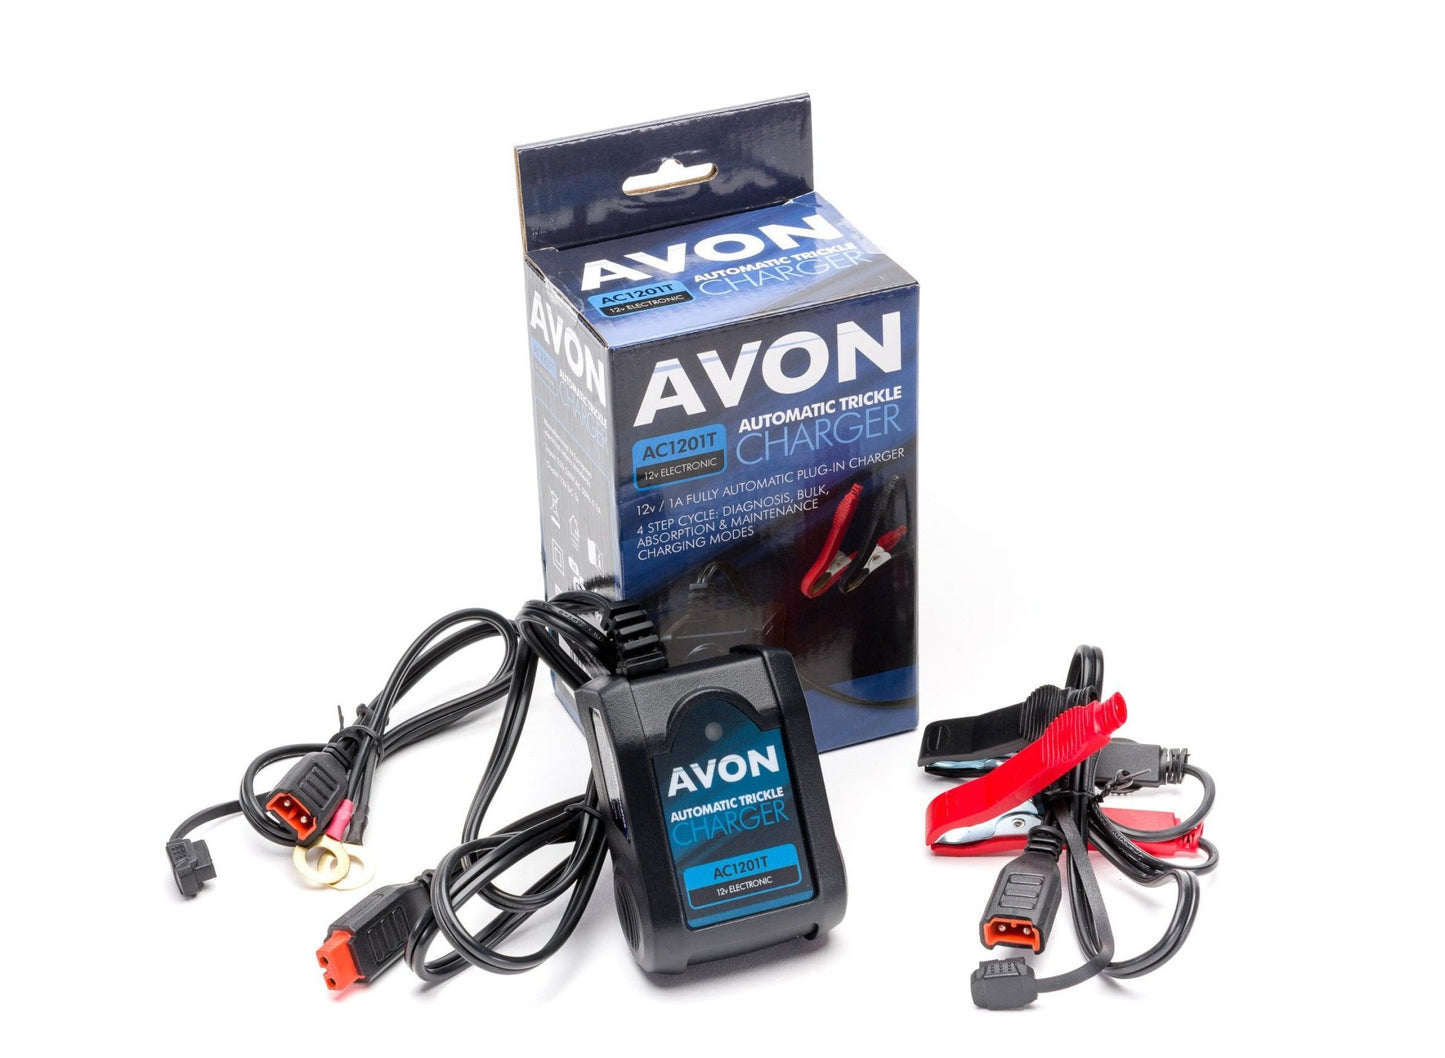 AVON  Smart Trickle Charger 12V 1Amp  Plug Top Style